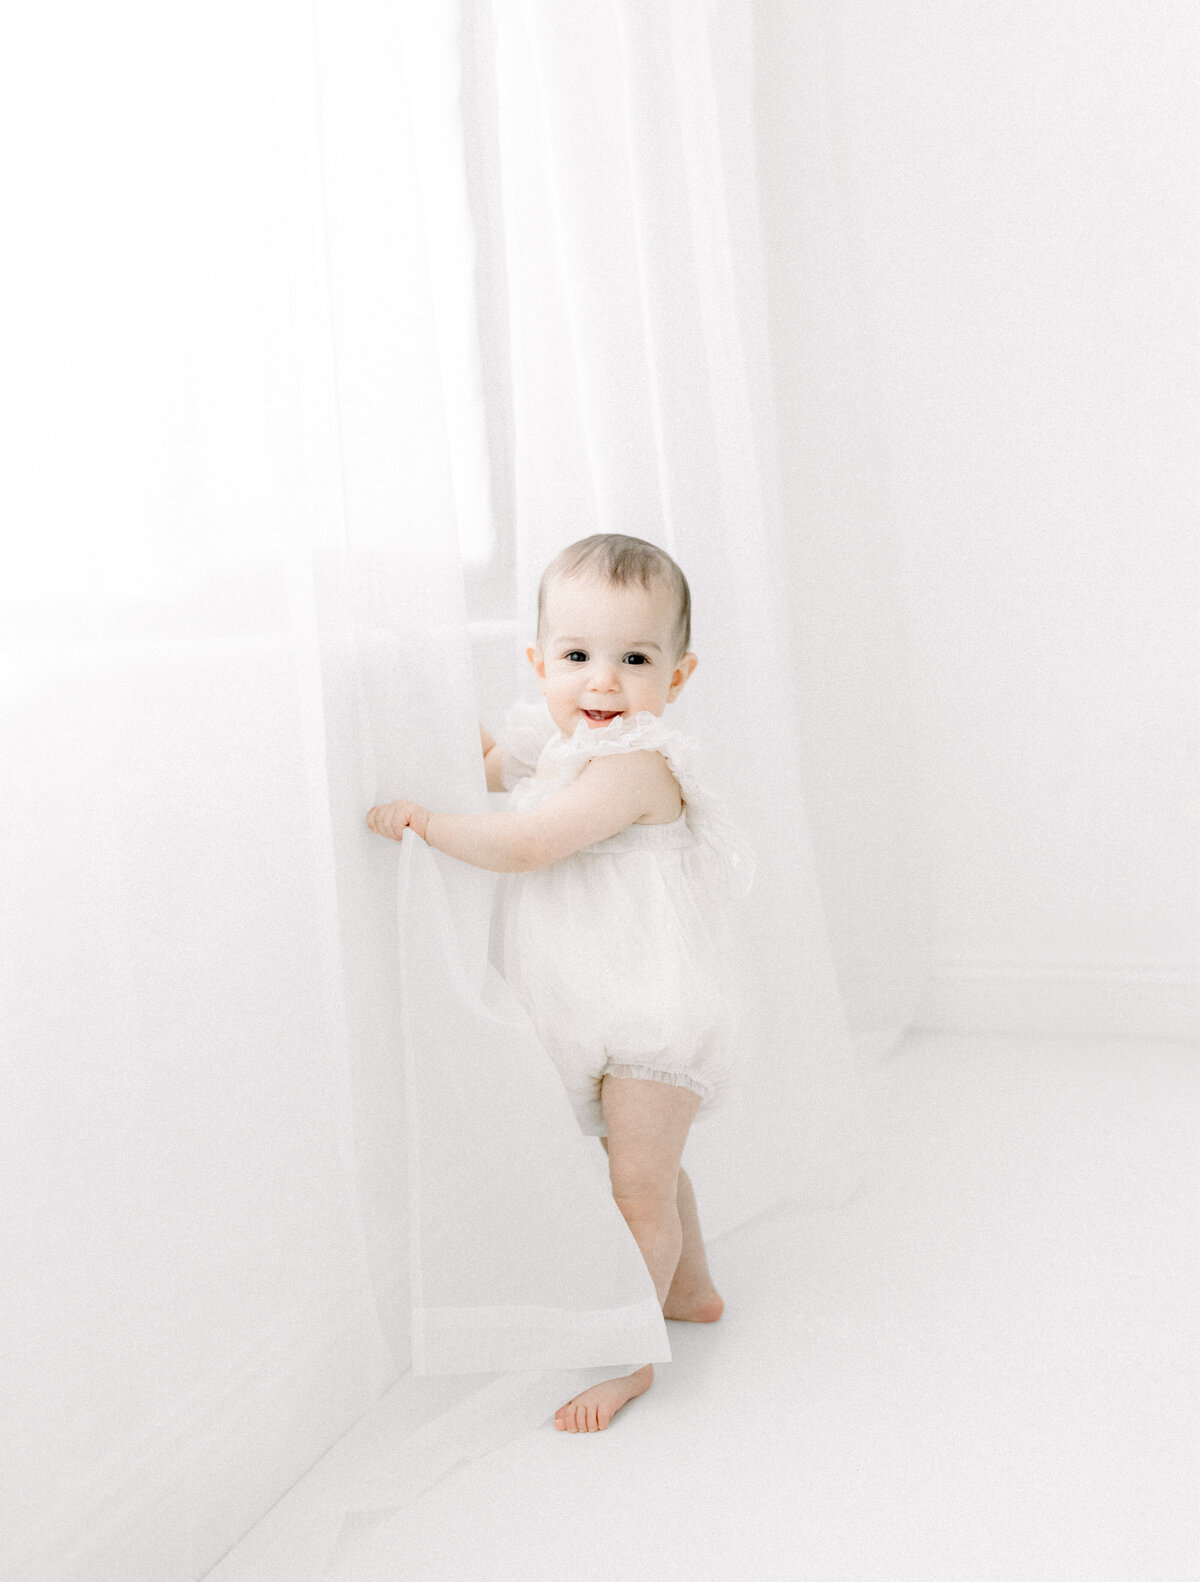 A baby girl standing up by a window holding the drapes